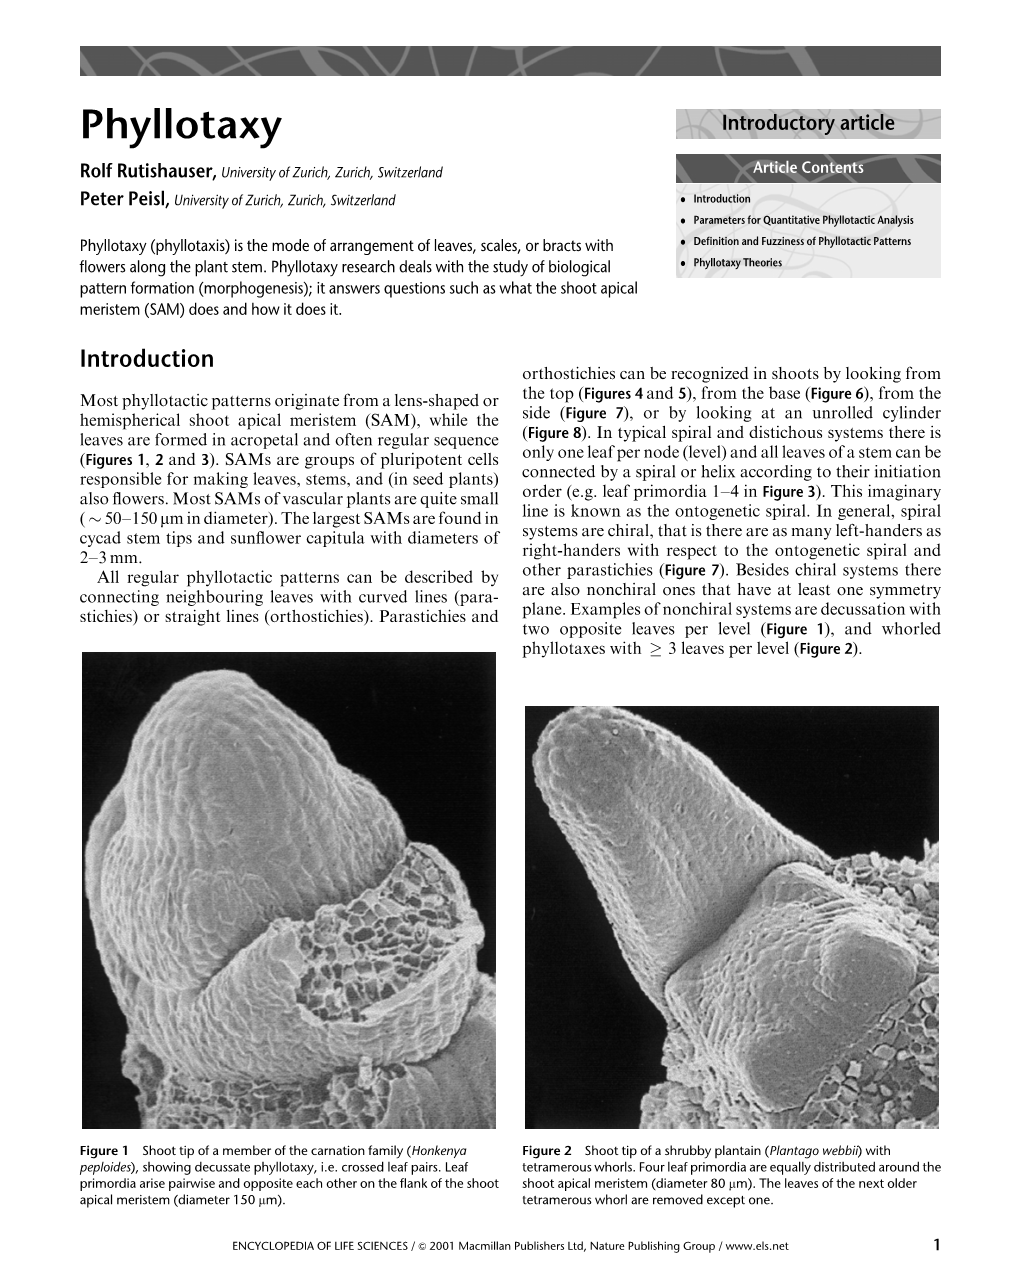 Phyllotaxy Introductory Article